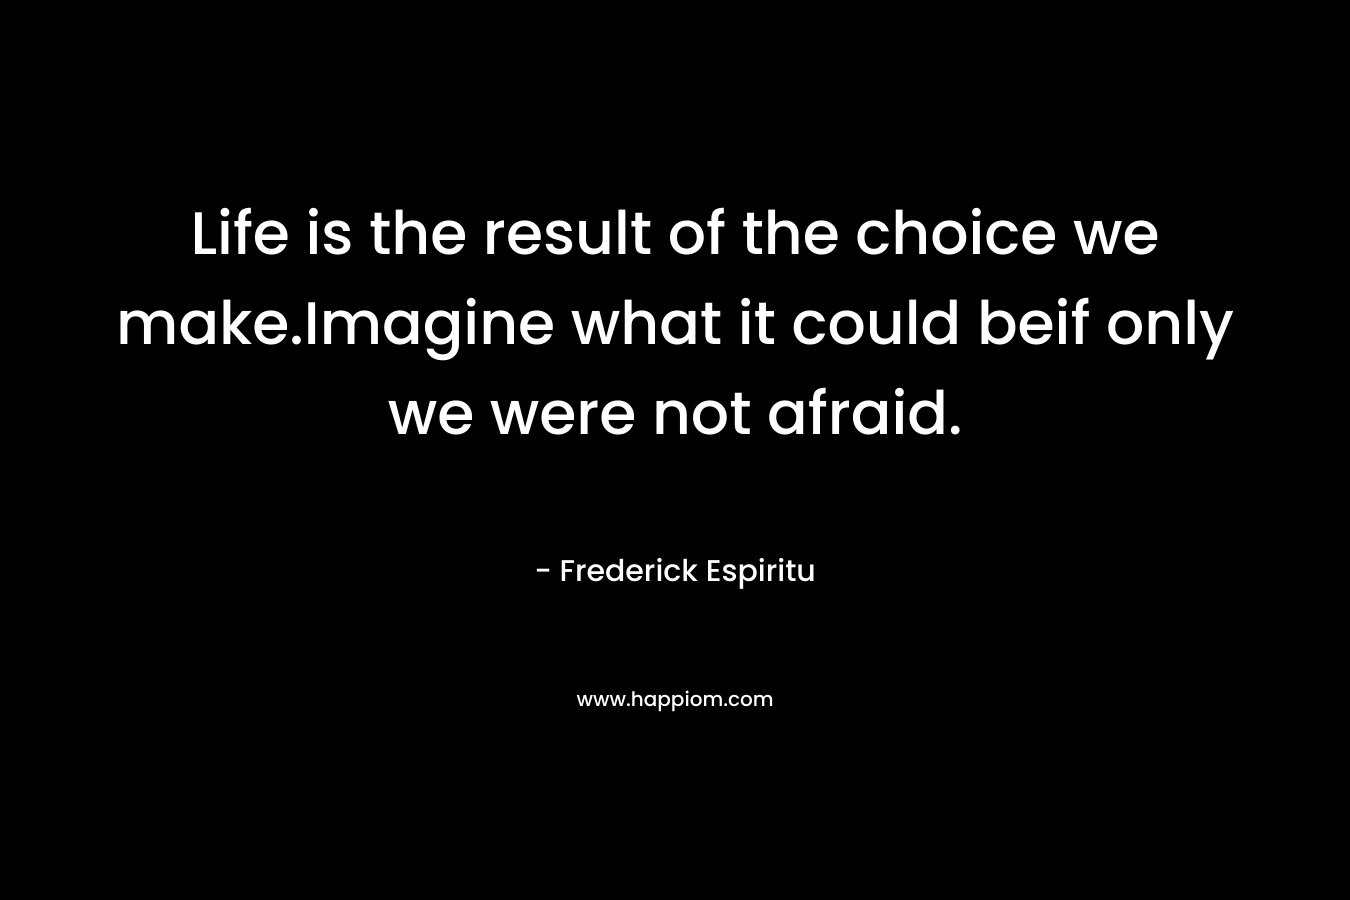 Life is the result of the choice we make.Imagine what it could beif only we were not afraid.